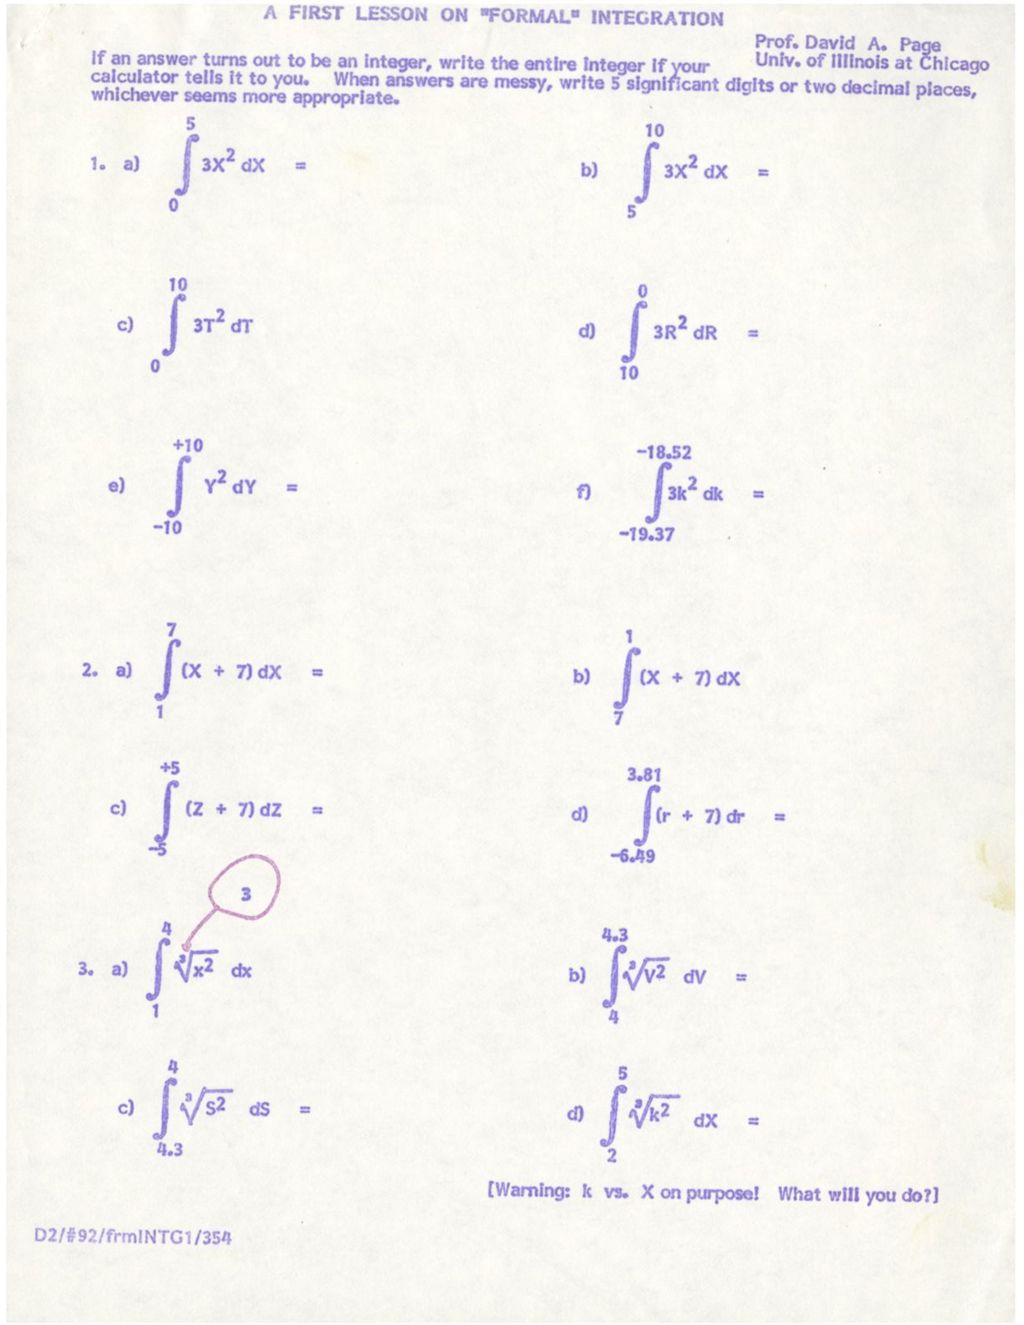 Miniature of A First Lesson on “Formal” Integration